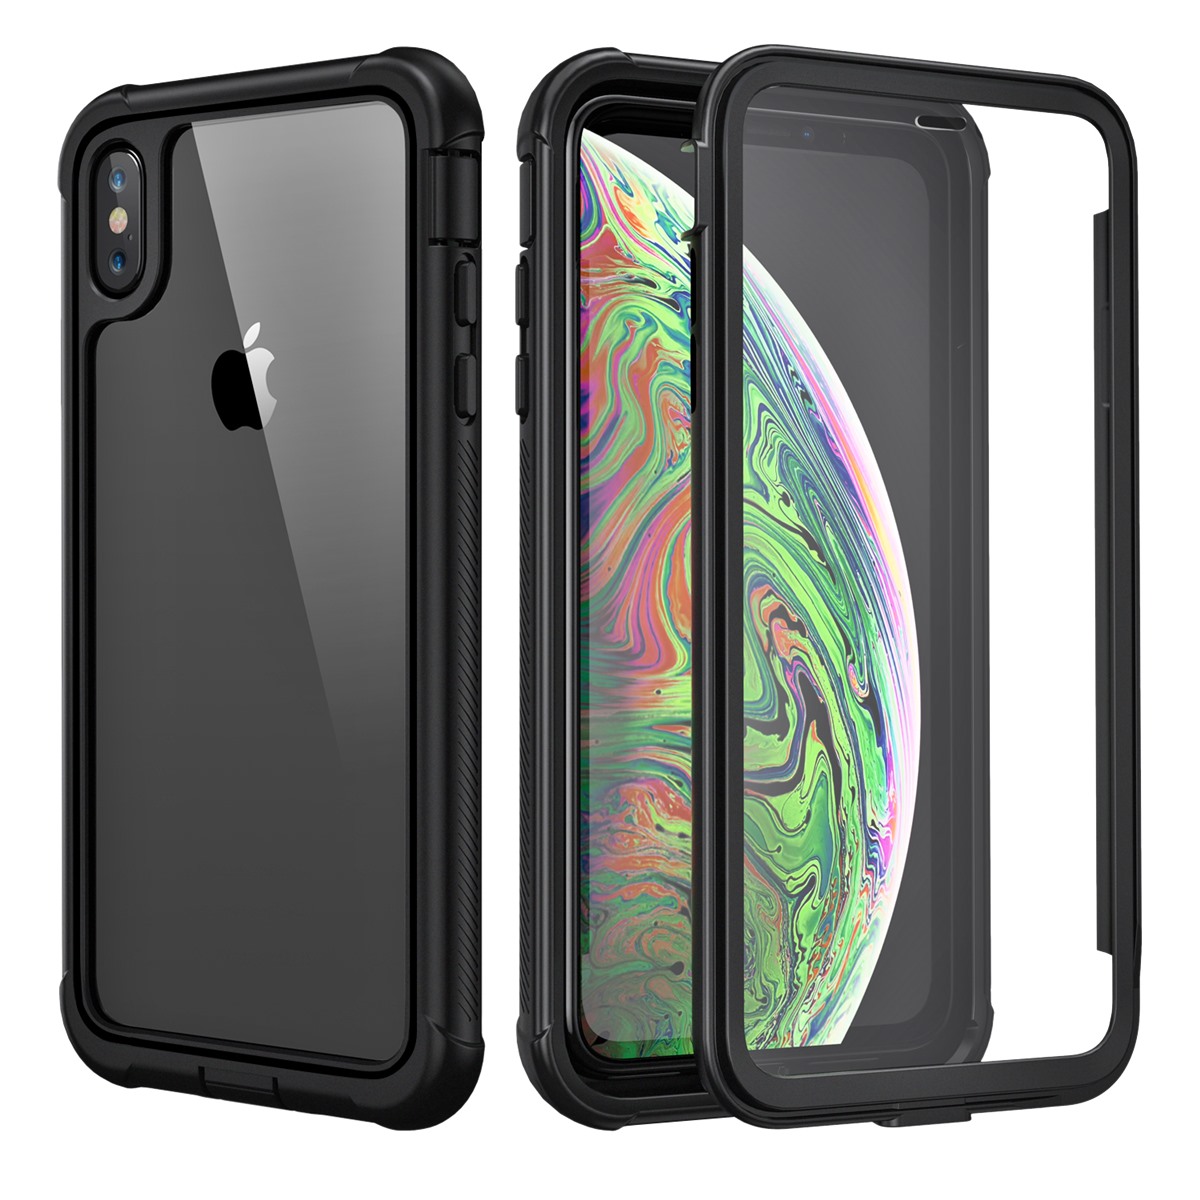 Top 15 iPhone XS Accessories You Can Buy | CellularNews